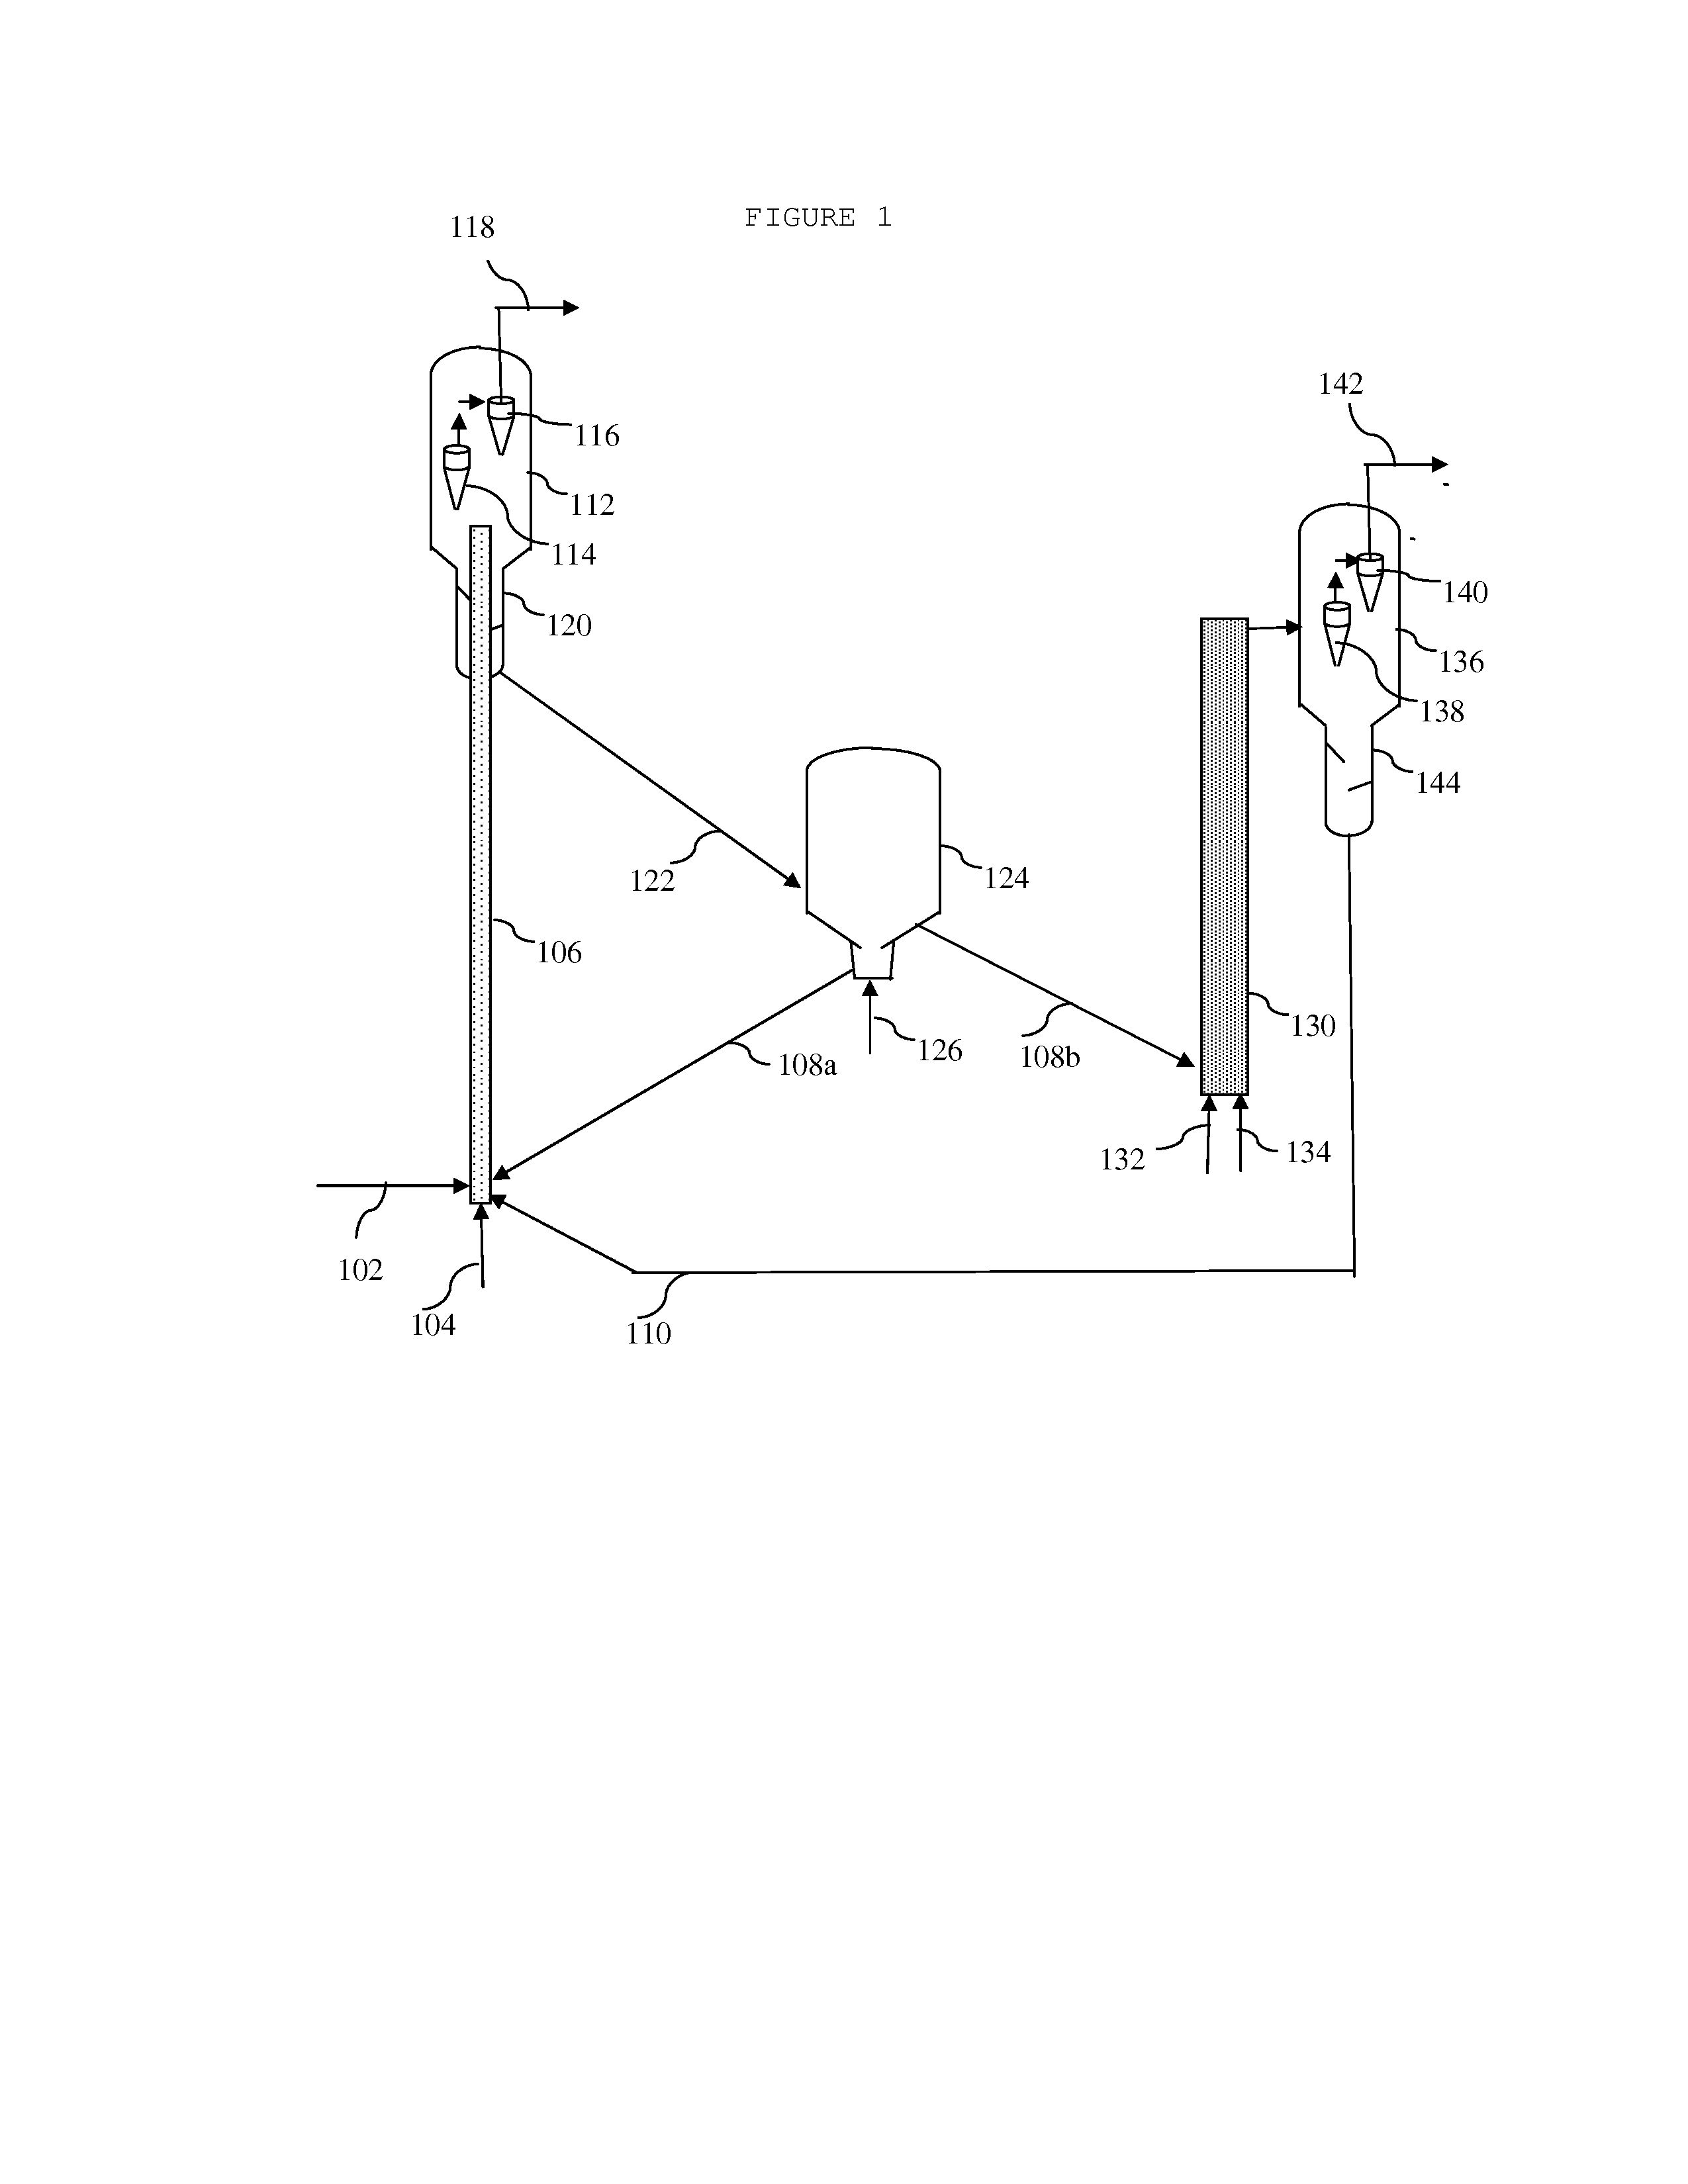 Process for making a distillate product and/or c2-c4 olefins